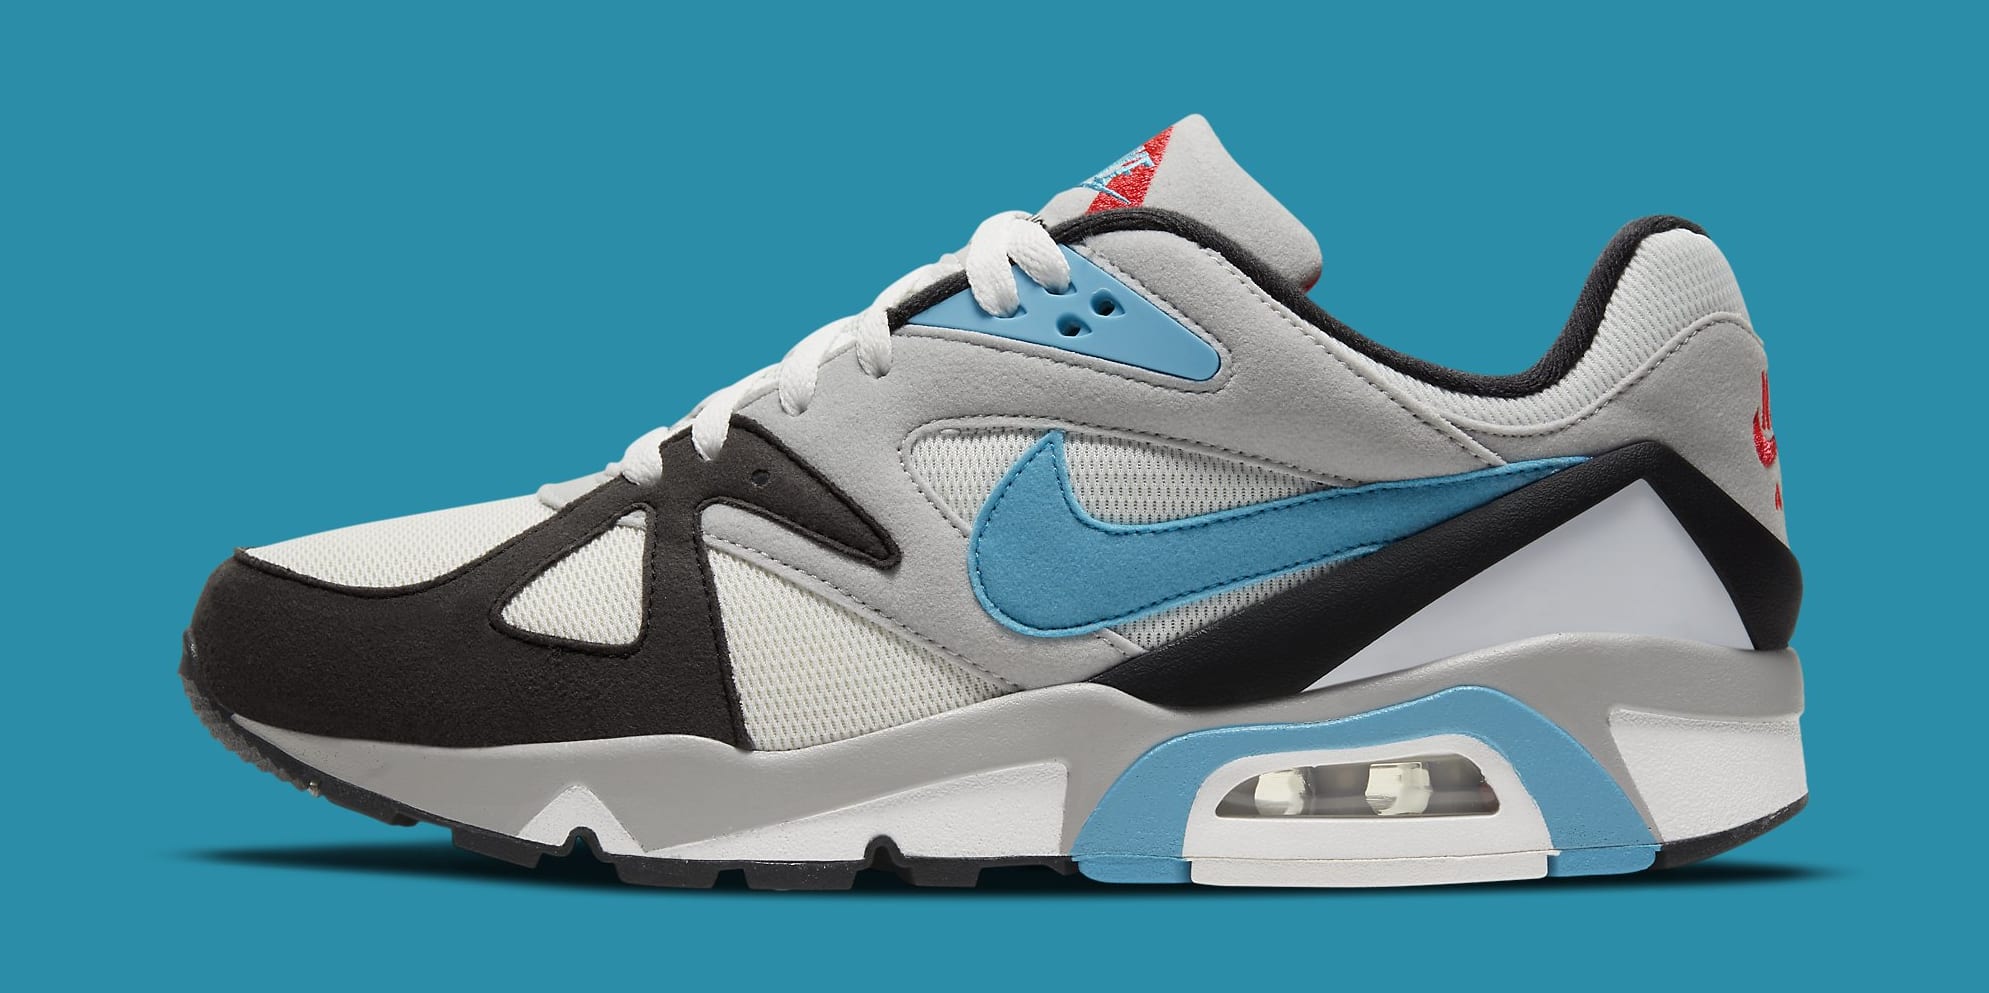 Nike Air Structure Triax 91 'Neo Teal and Infrared' CV3492-100 ...